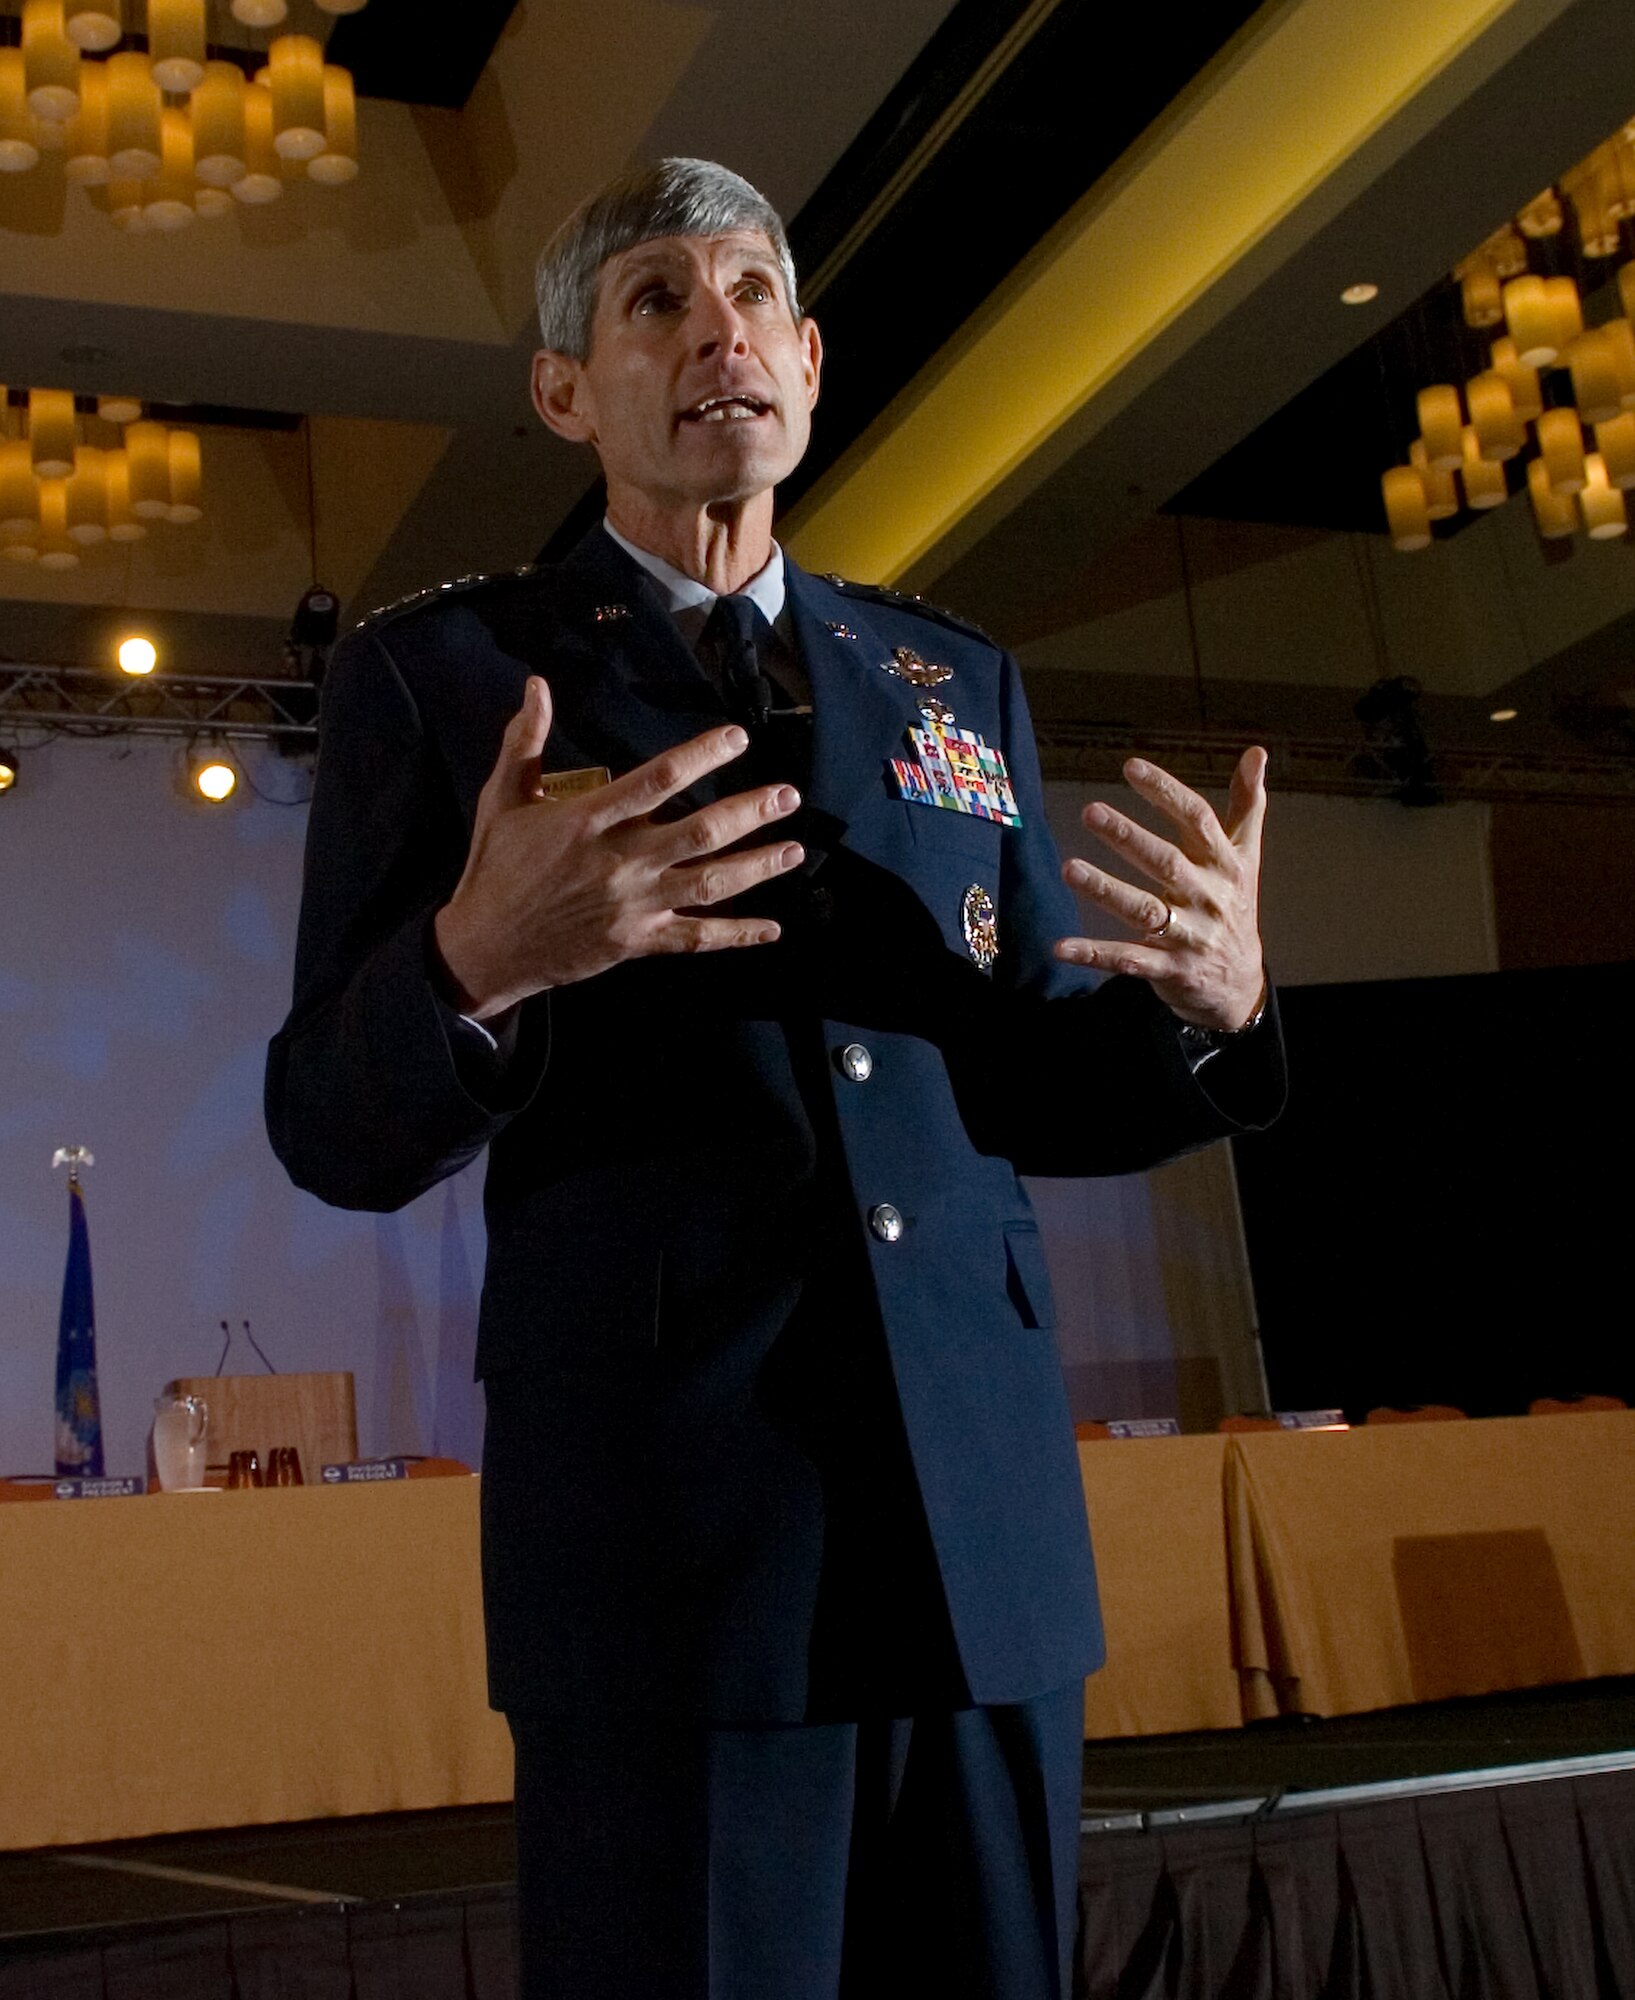 Gen. Norton Schwartz, Air Force chief of staff, delivers his keynote speech Aug. 25 during the Air Force Sergeants Association's annual Professional Airmen's Conference and International Convention in San Antonio. The general discussed the importance of noncommissioned officers and reiterated his faith in the Air Force to the packed ballroom of Air Force Sergeants Association members. (U.S. Air Force photo/Lance Cheung)